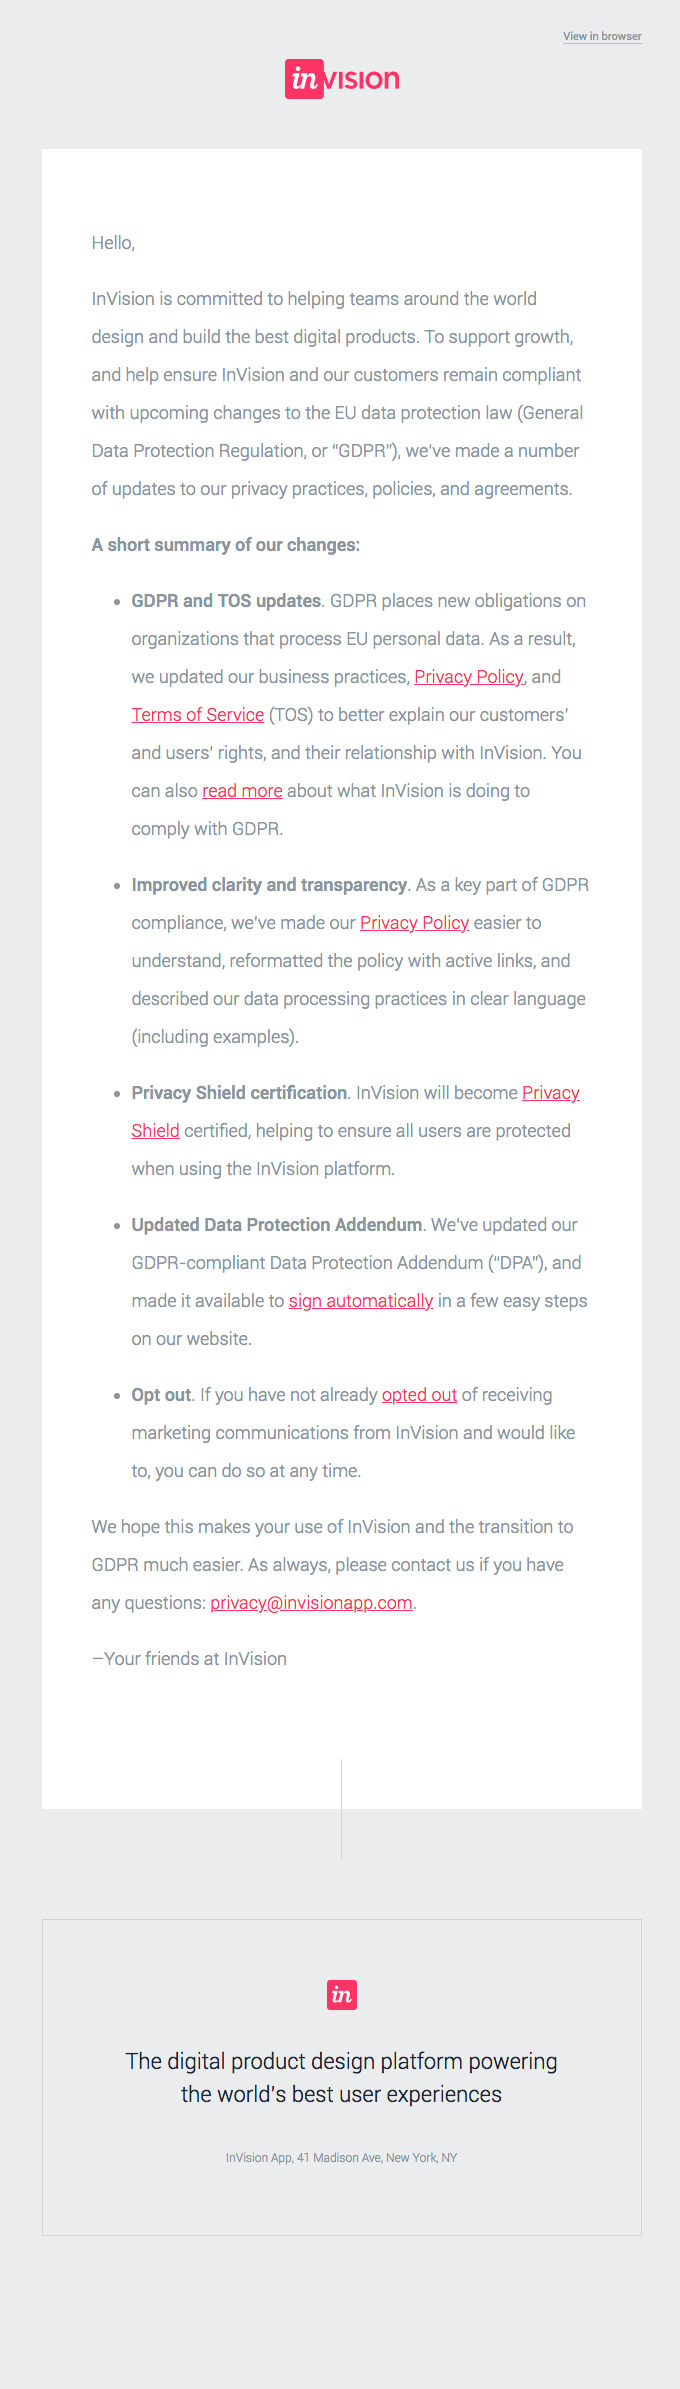 InVision Privacy Policy and Terms of Service updates